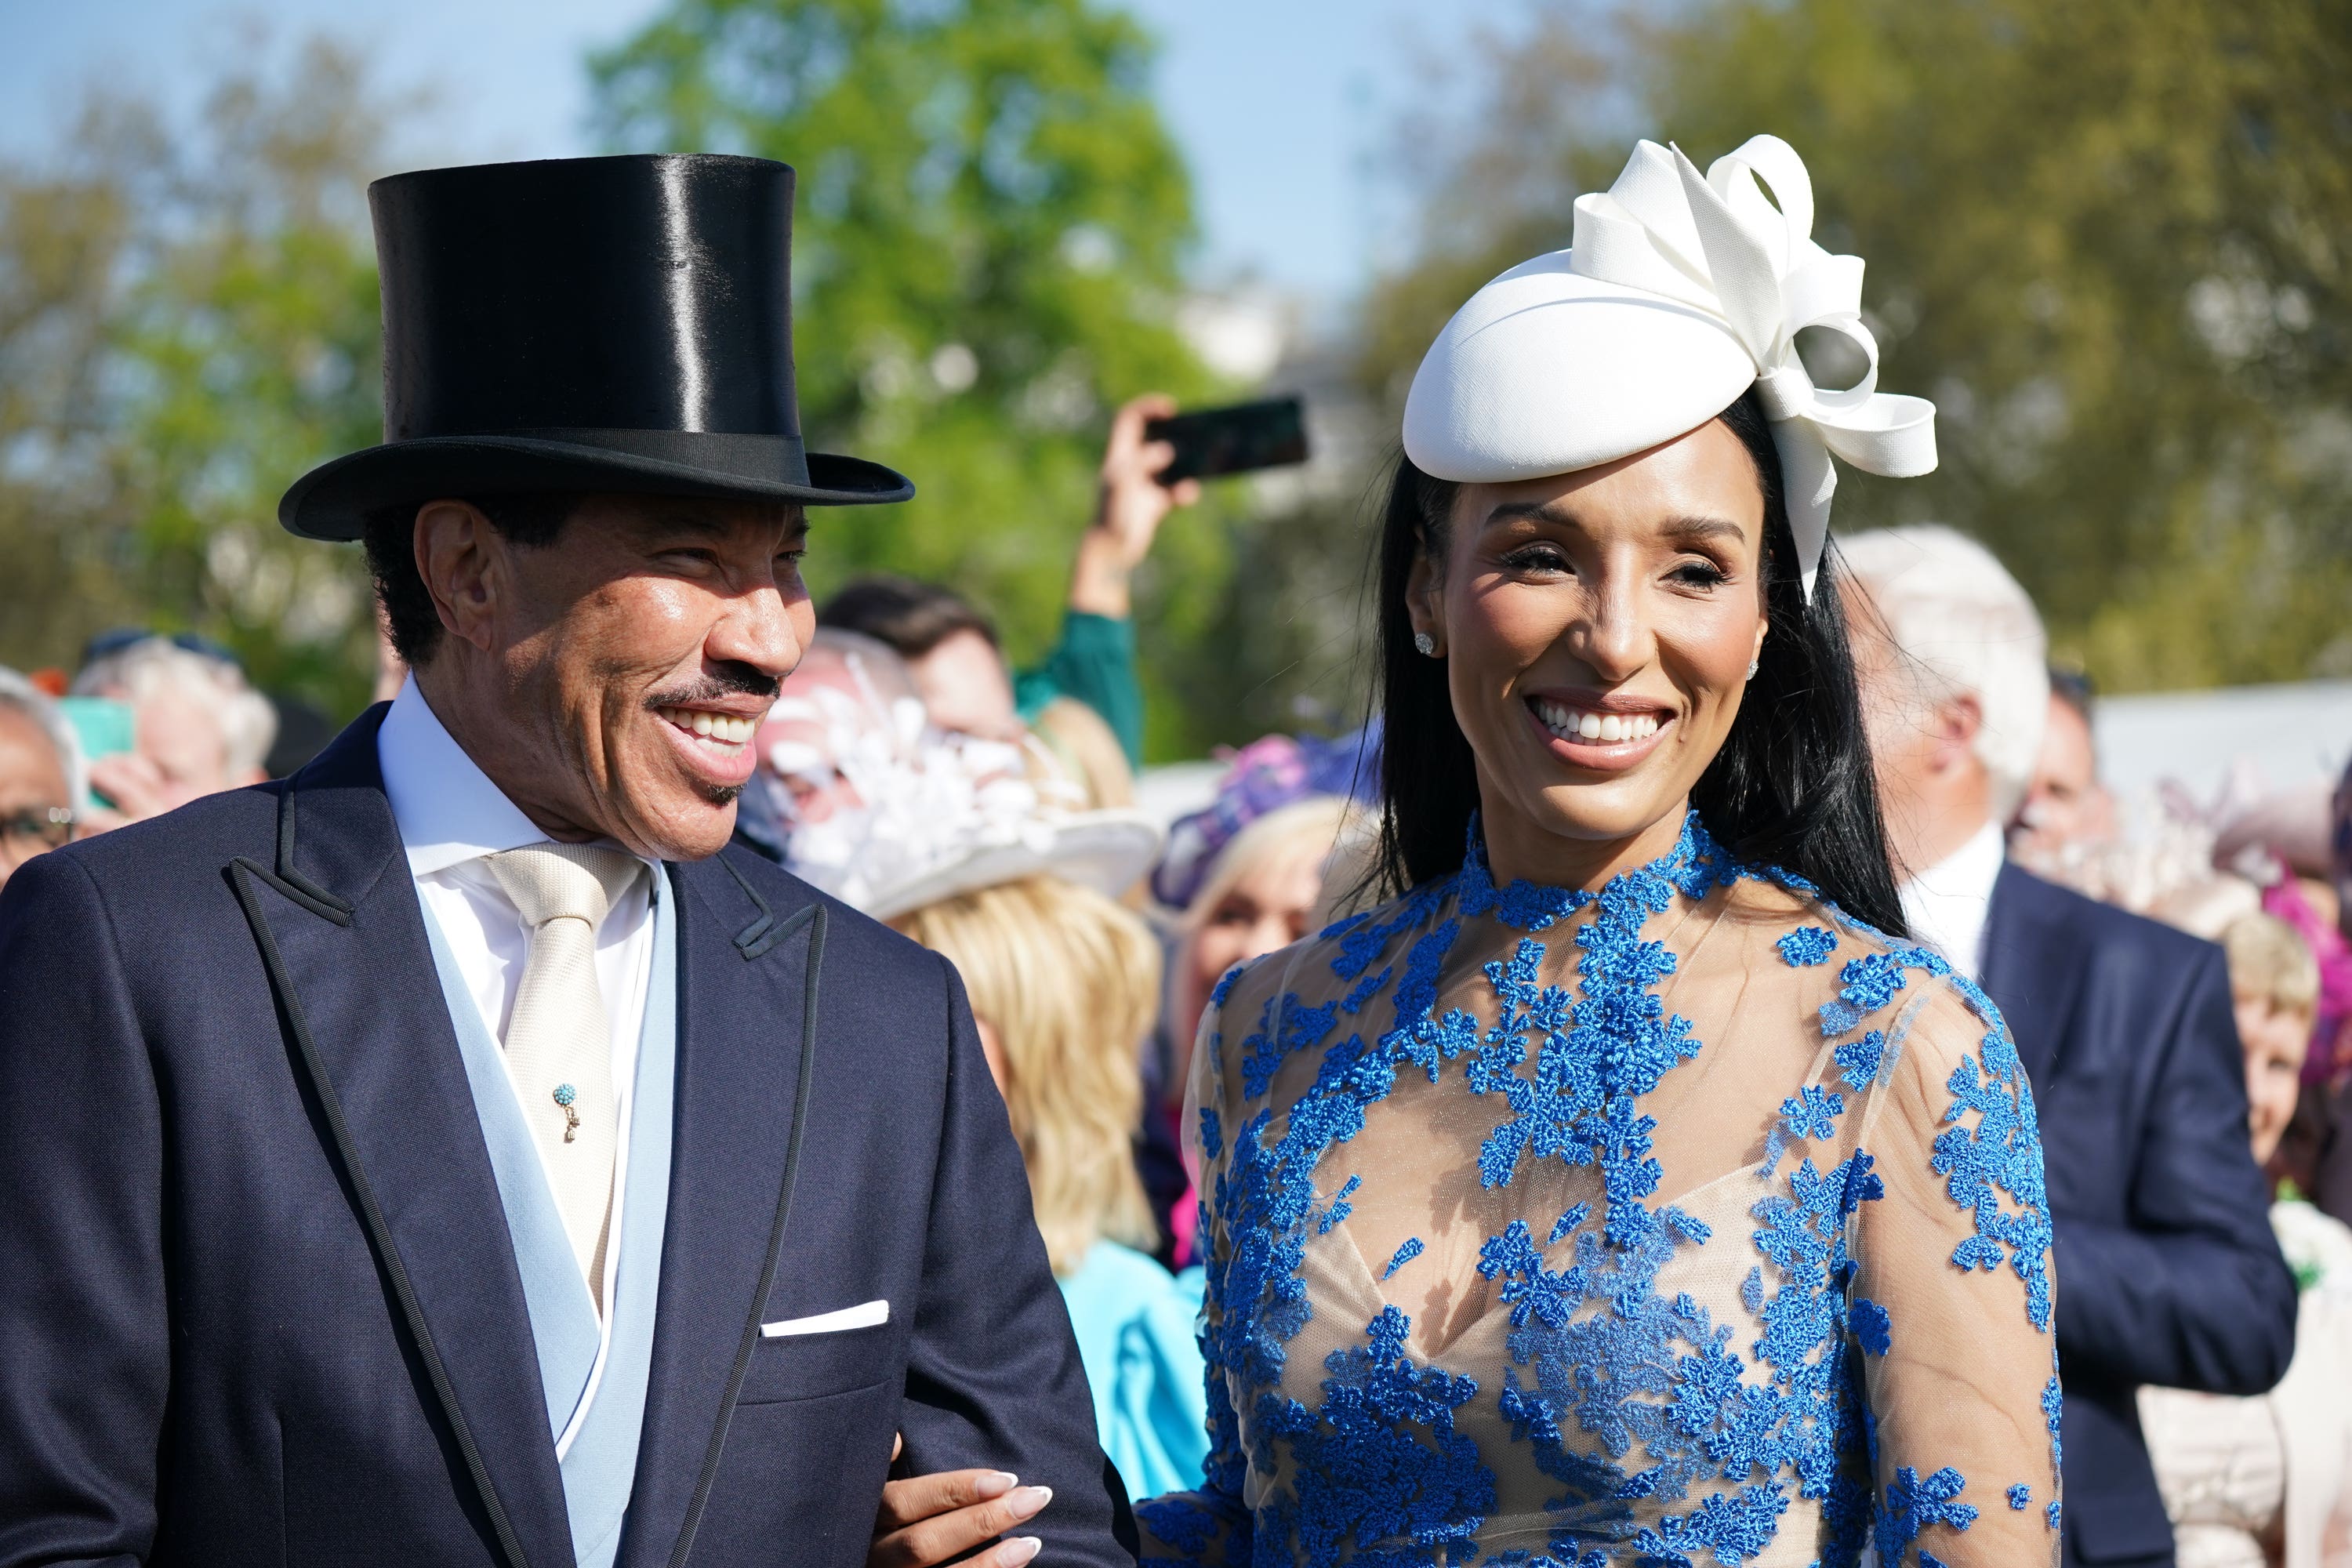 Lionel Richie joins guests at royal garden party ahead of Coronation 